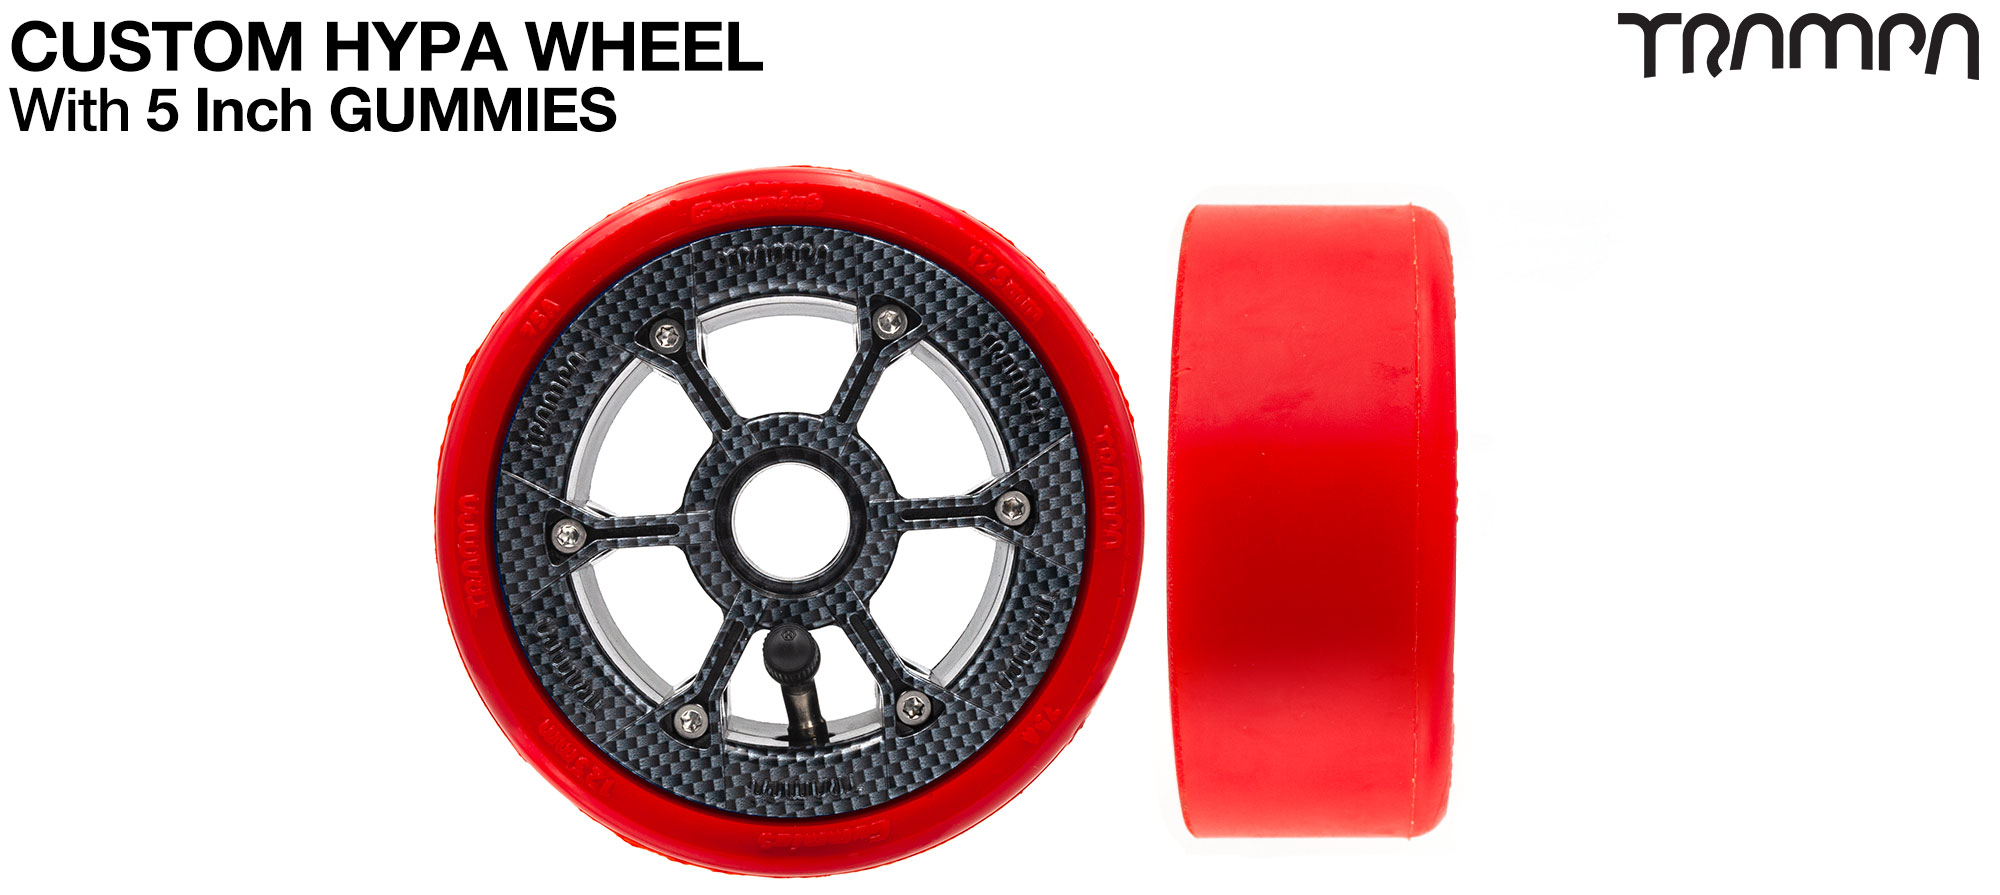 HYPA WHEELS Showing with 5 Inch GUMMIES